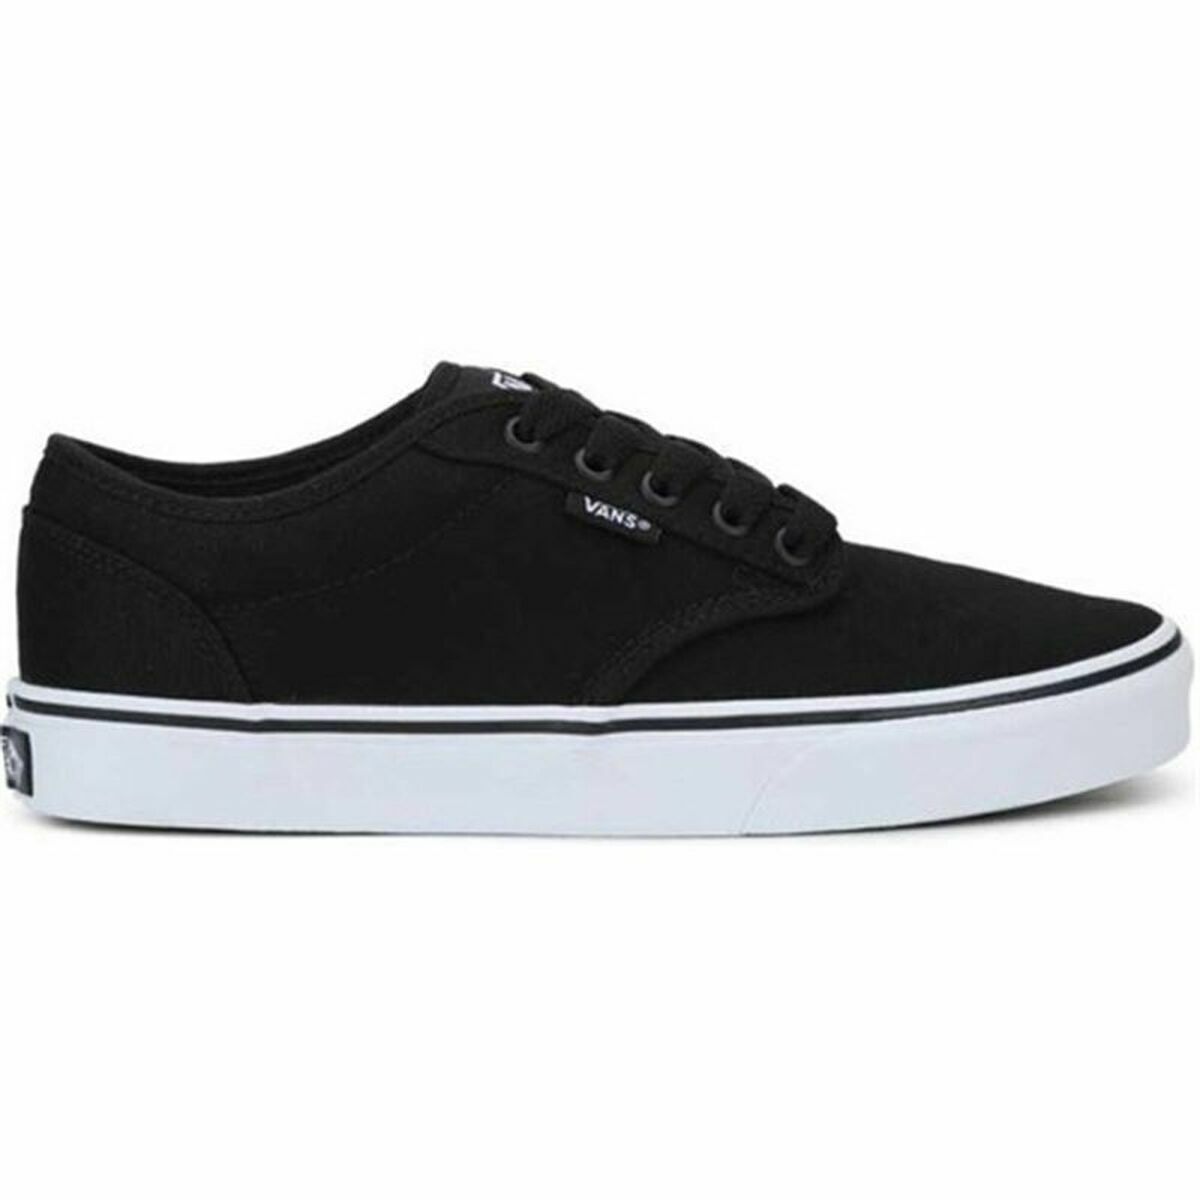 Chaussures casual Vans Atwood MN Noir